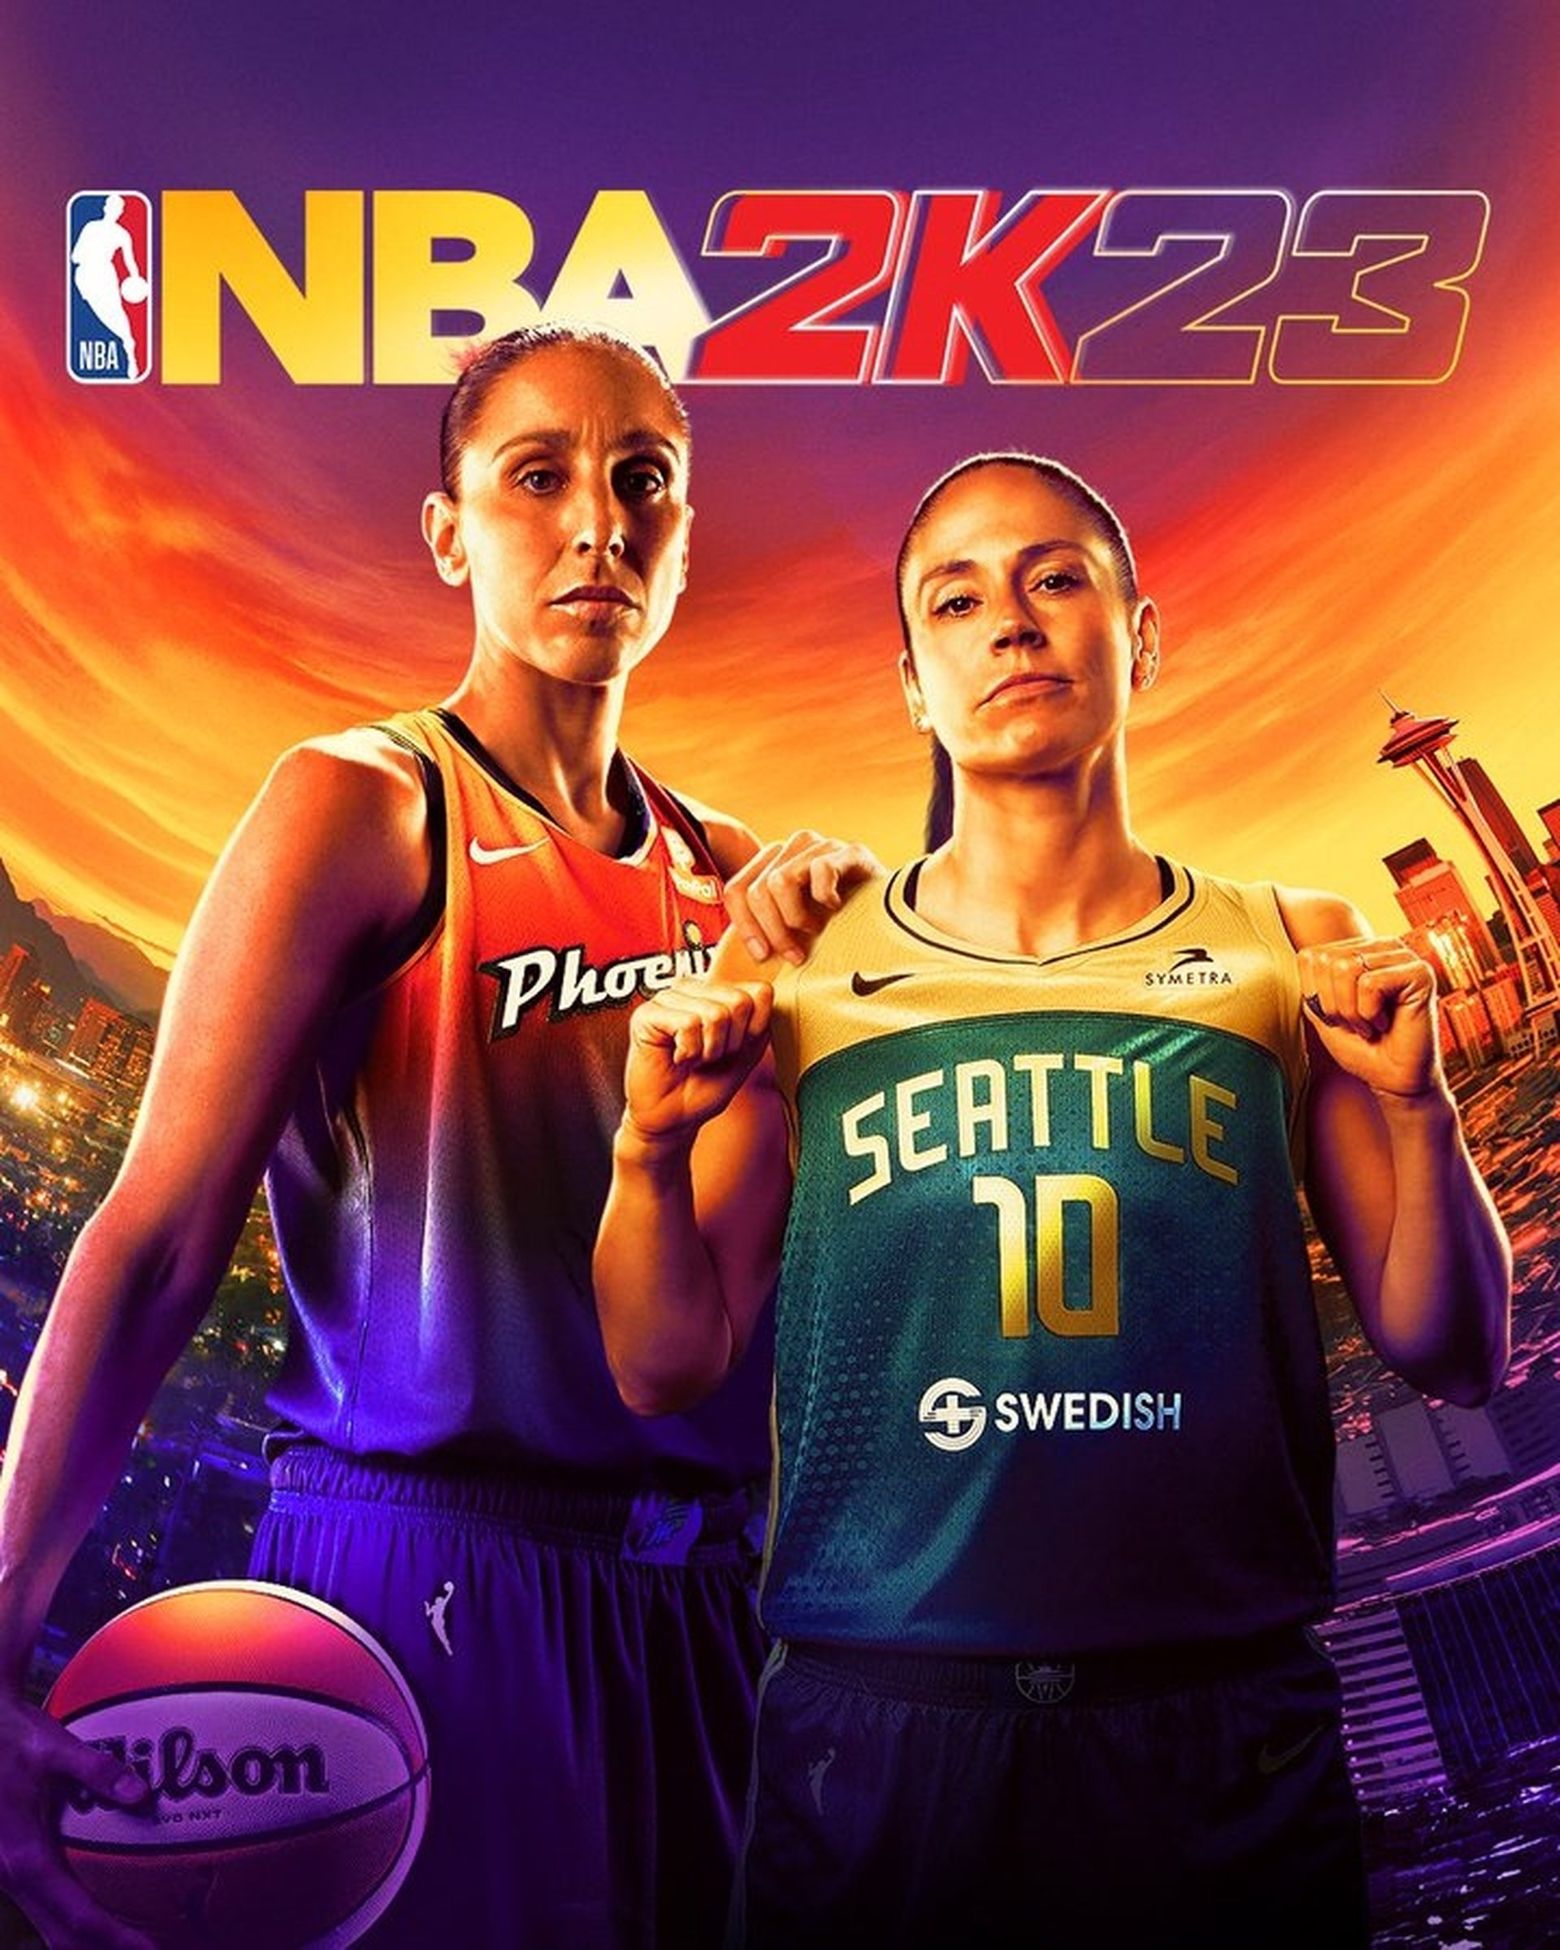 WNBA's Candace Parker makes history as first woman on cover of NBA 2K